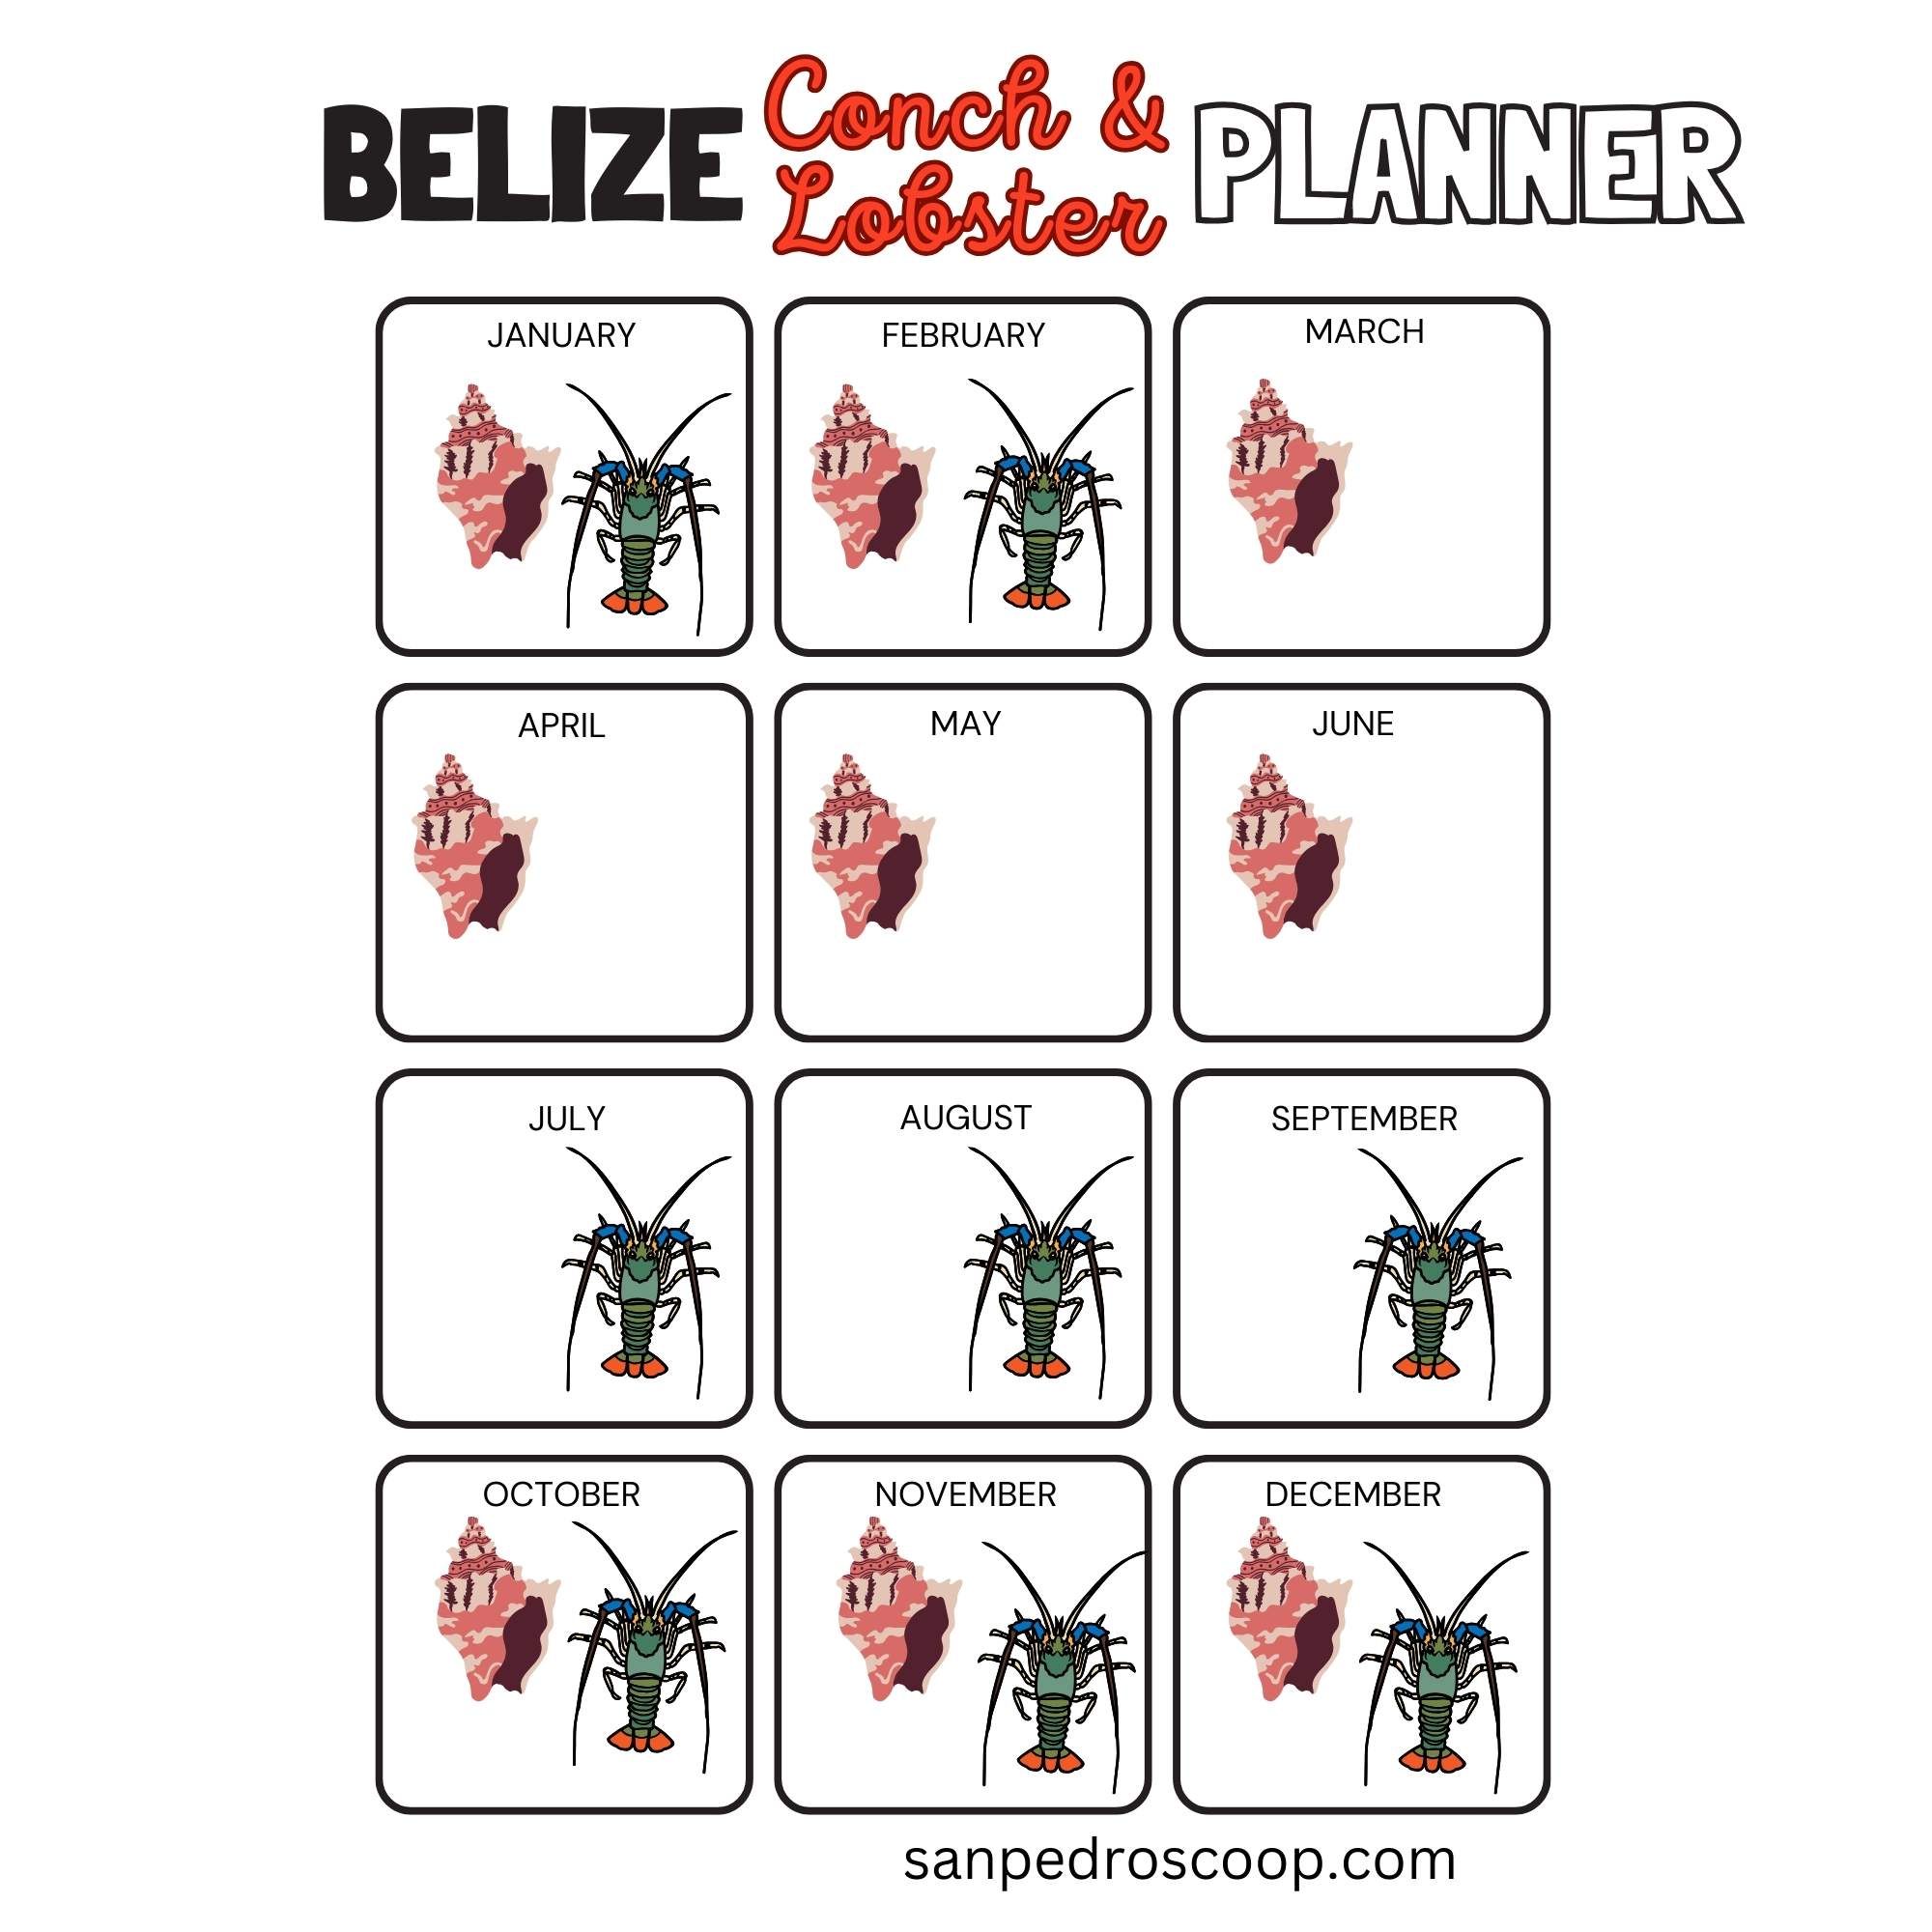 Graphic showing the months of the year and the lobster and conch seaons in belize